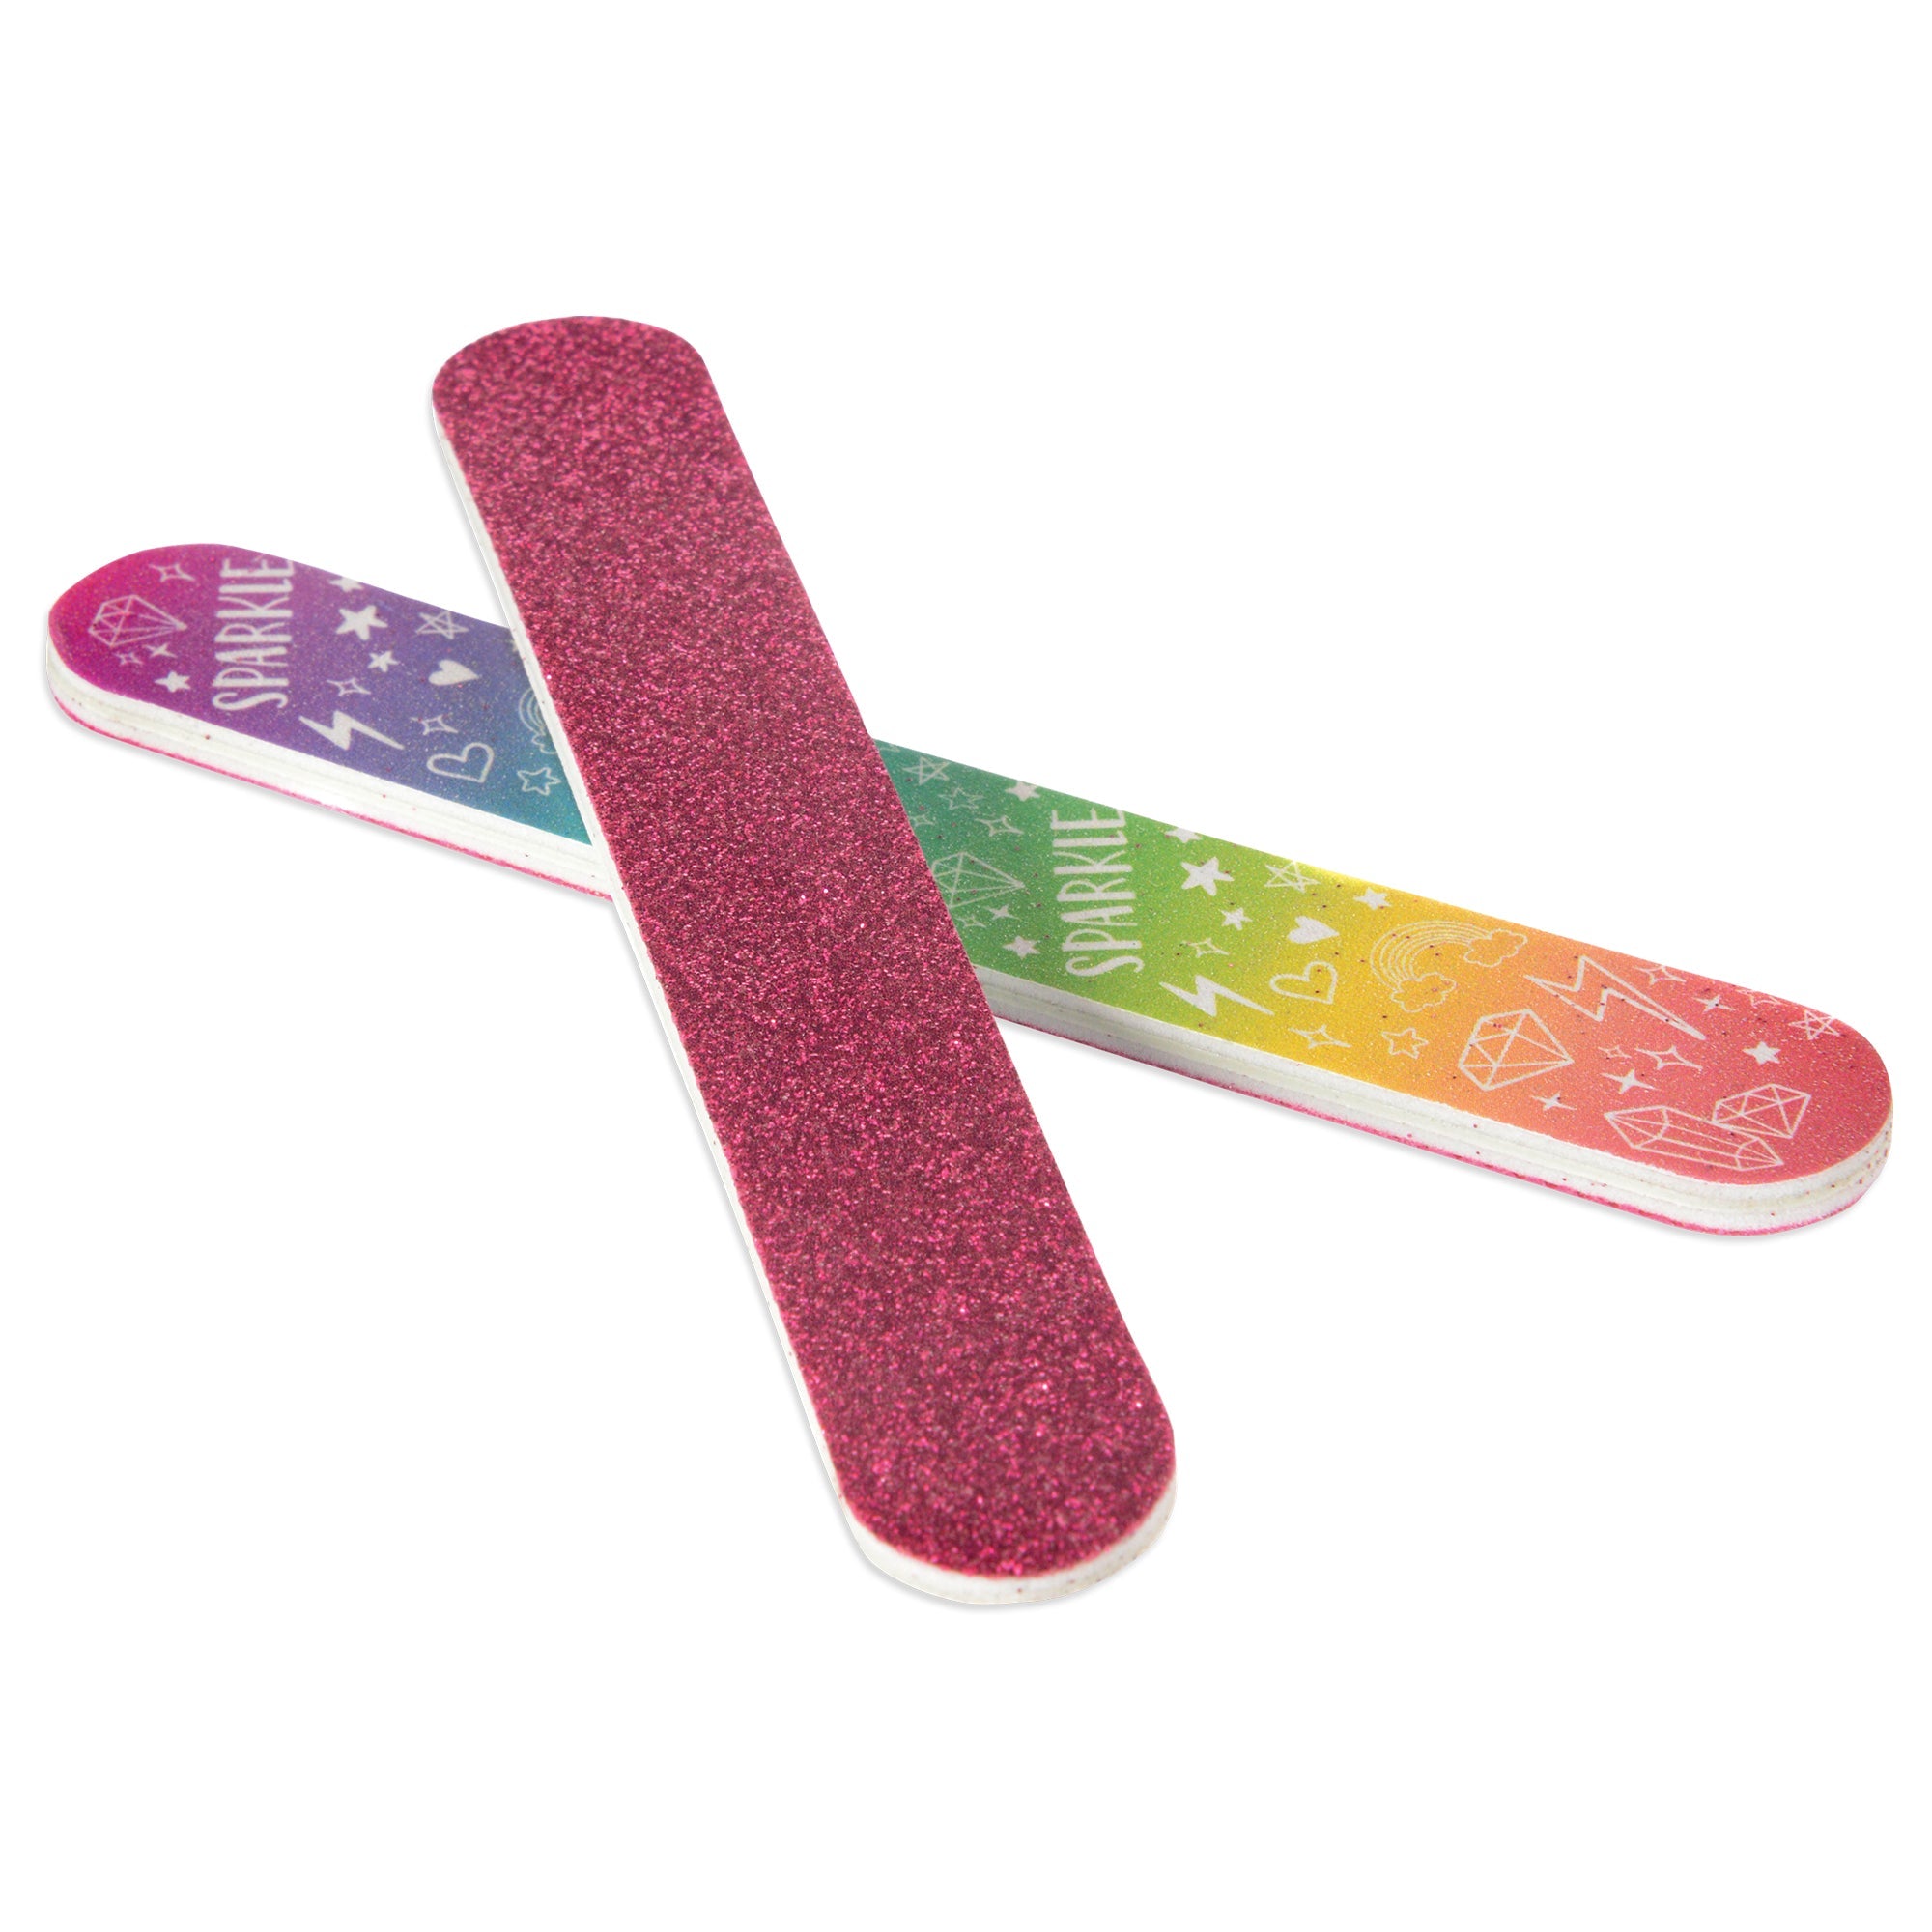 Sparkle 8 Nail Files   5.125in